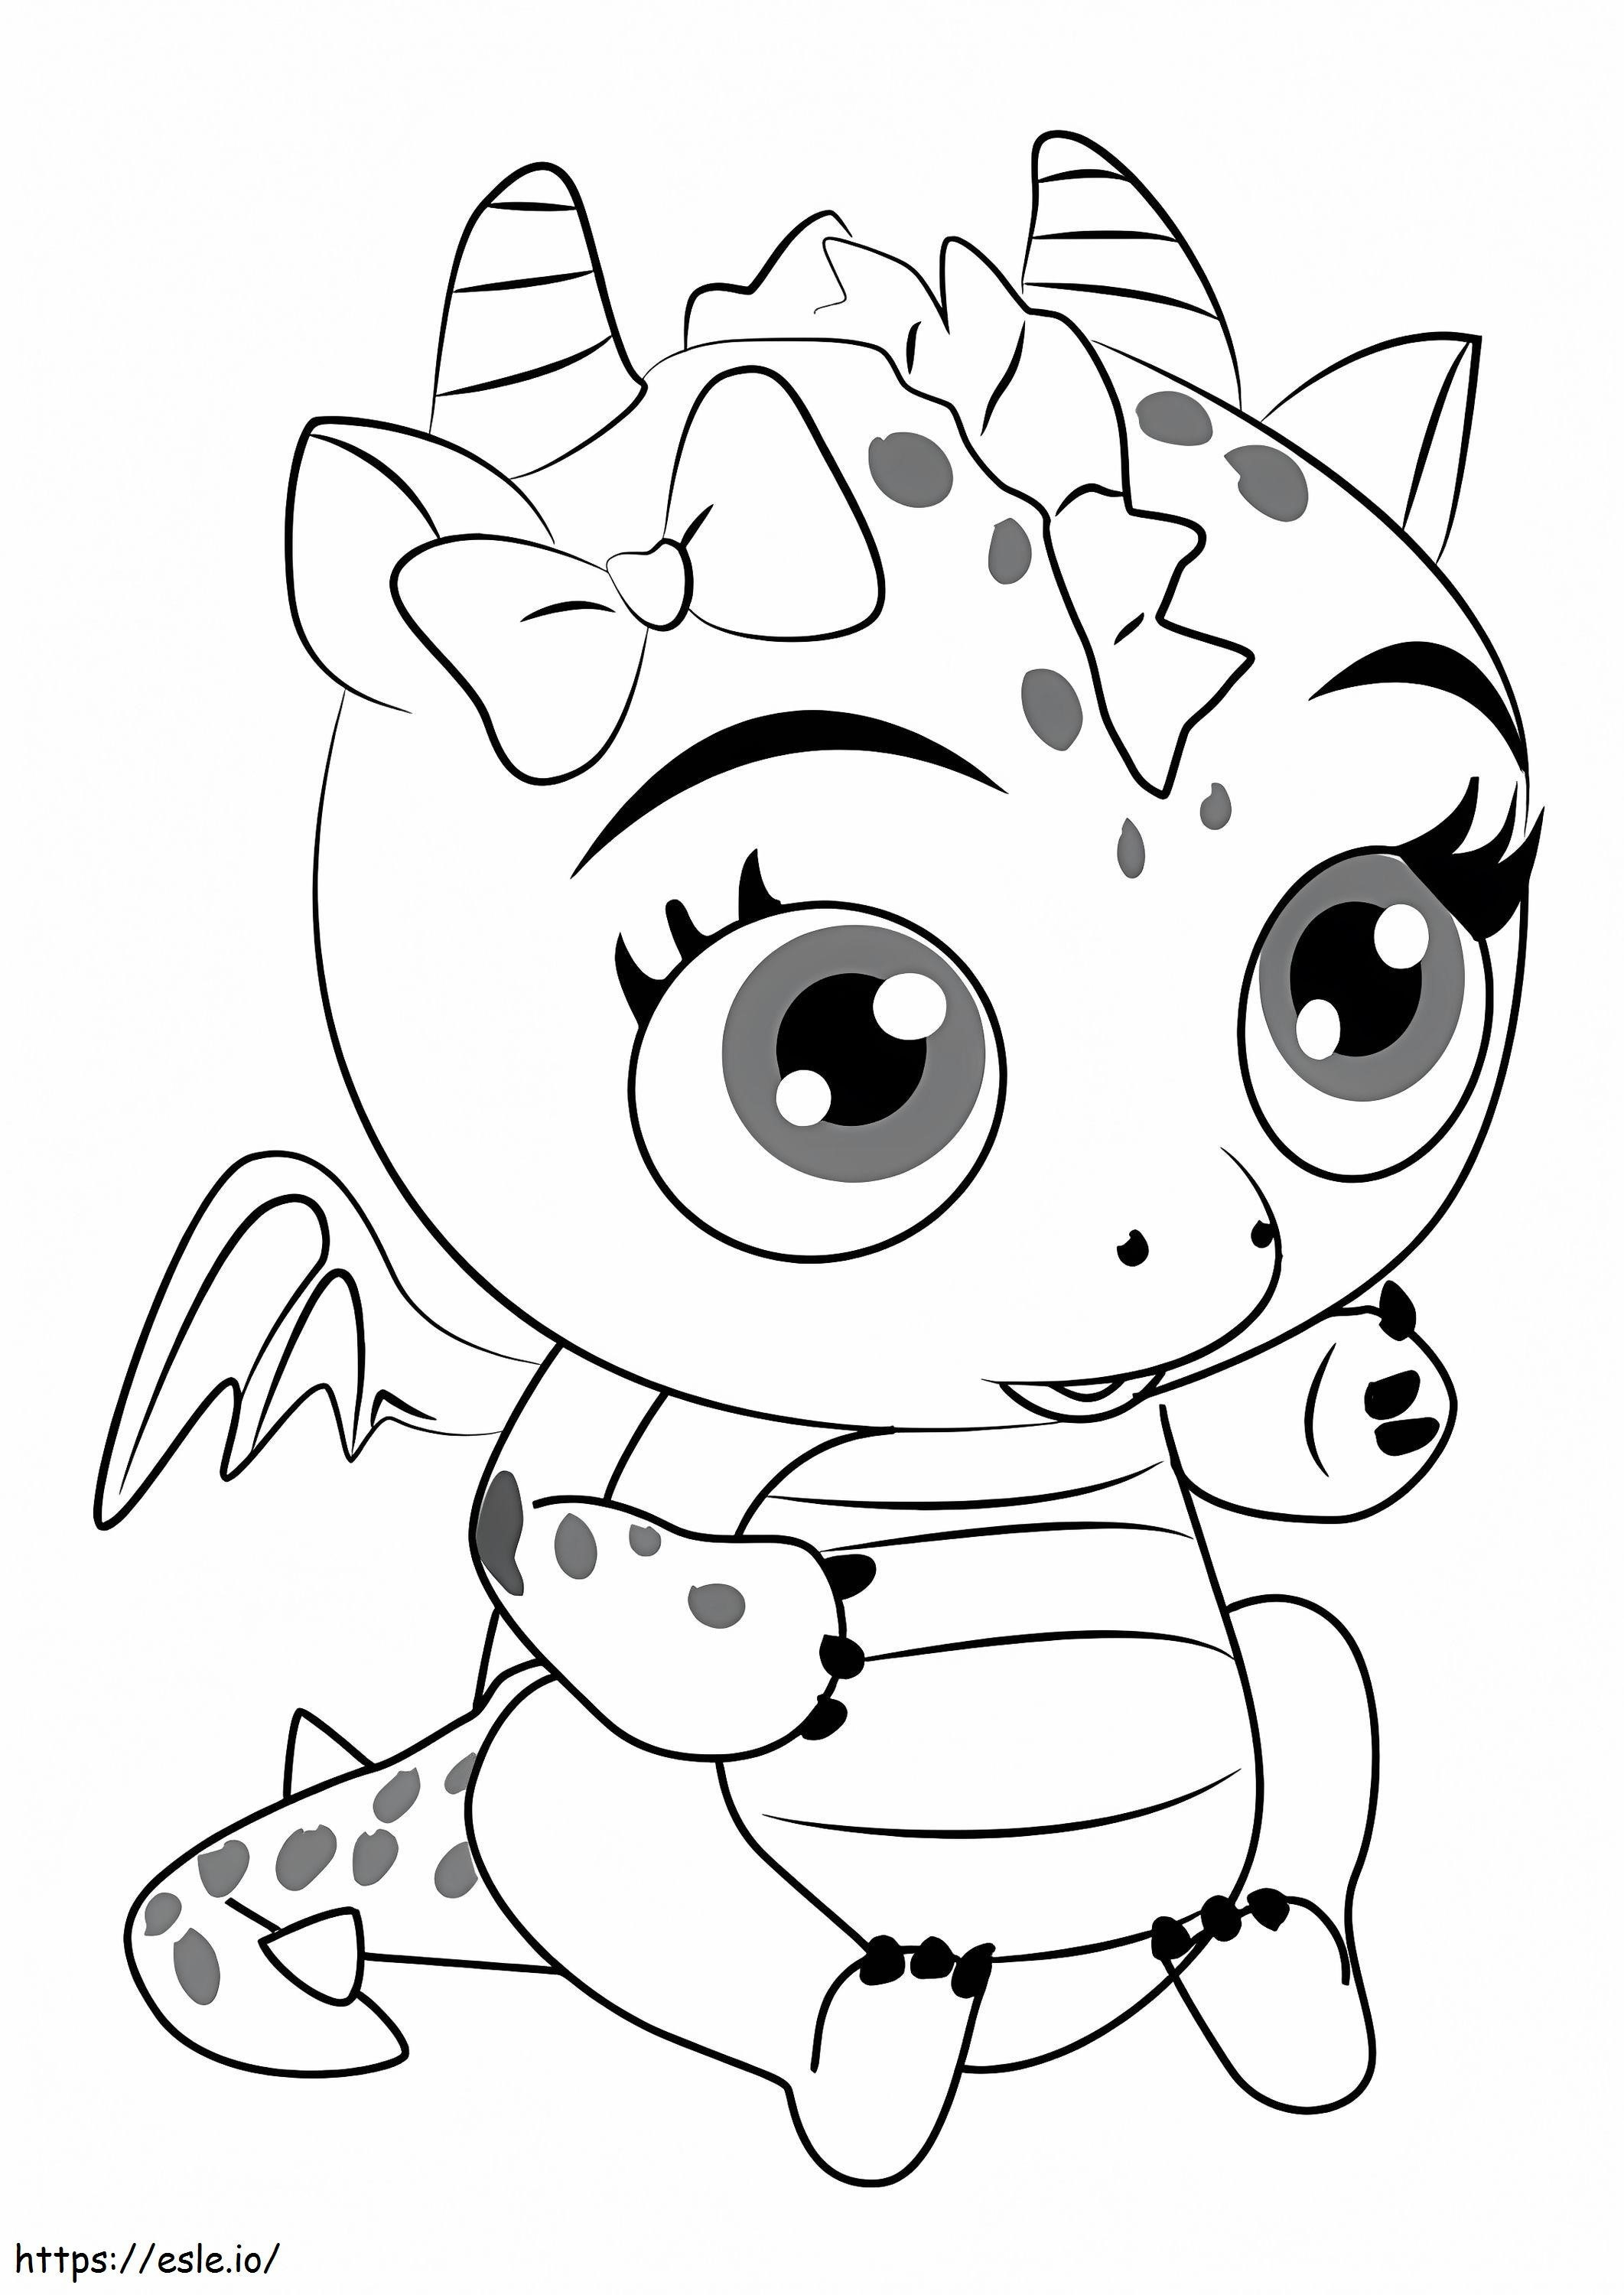 Cute Flare From Little Charmers coloring page